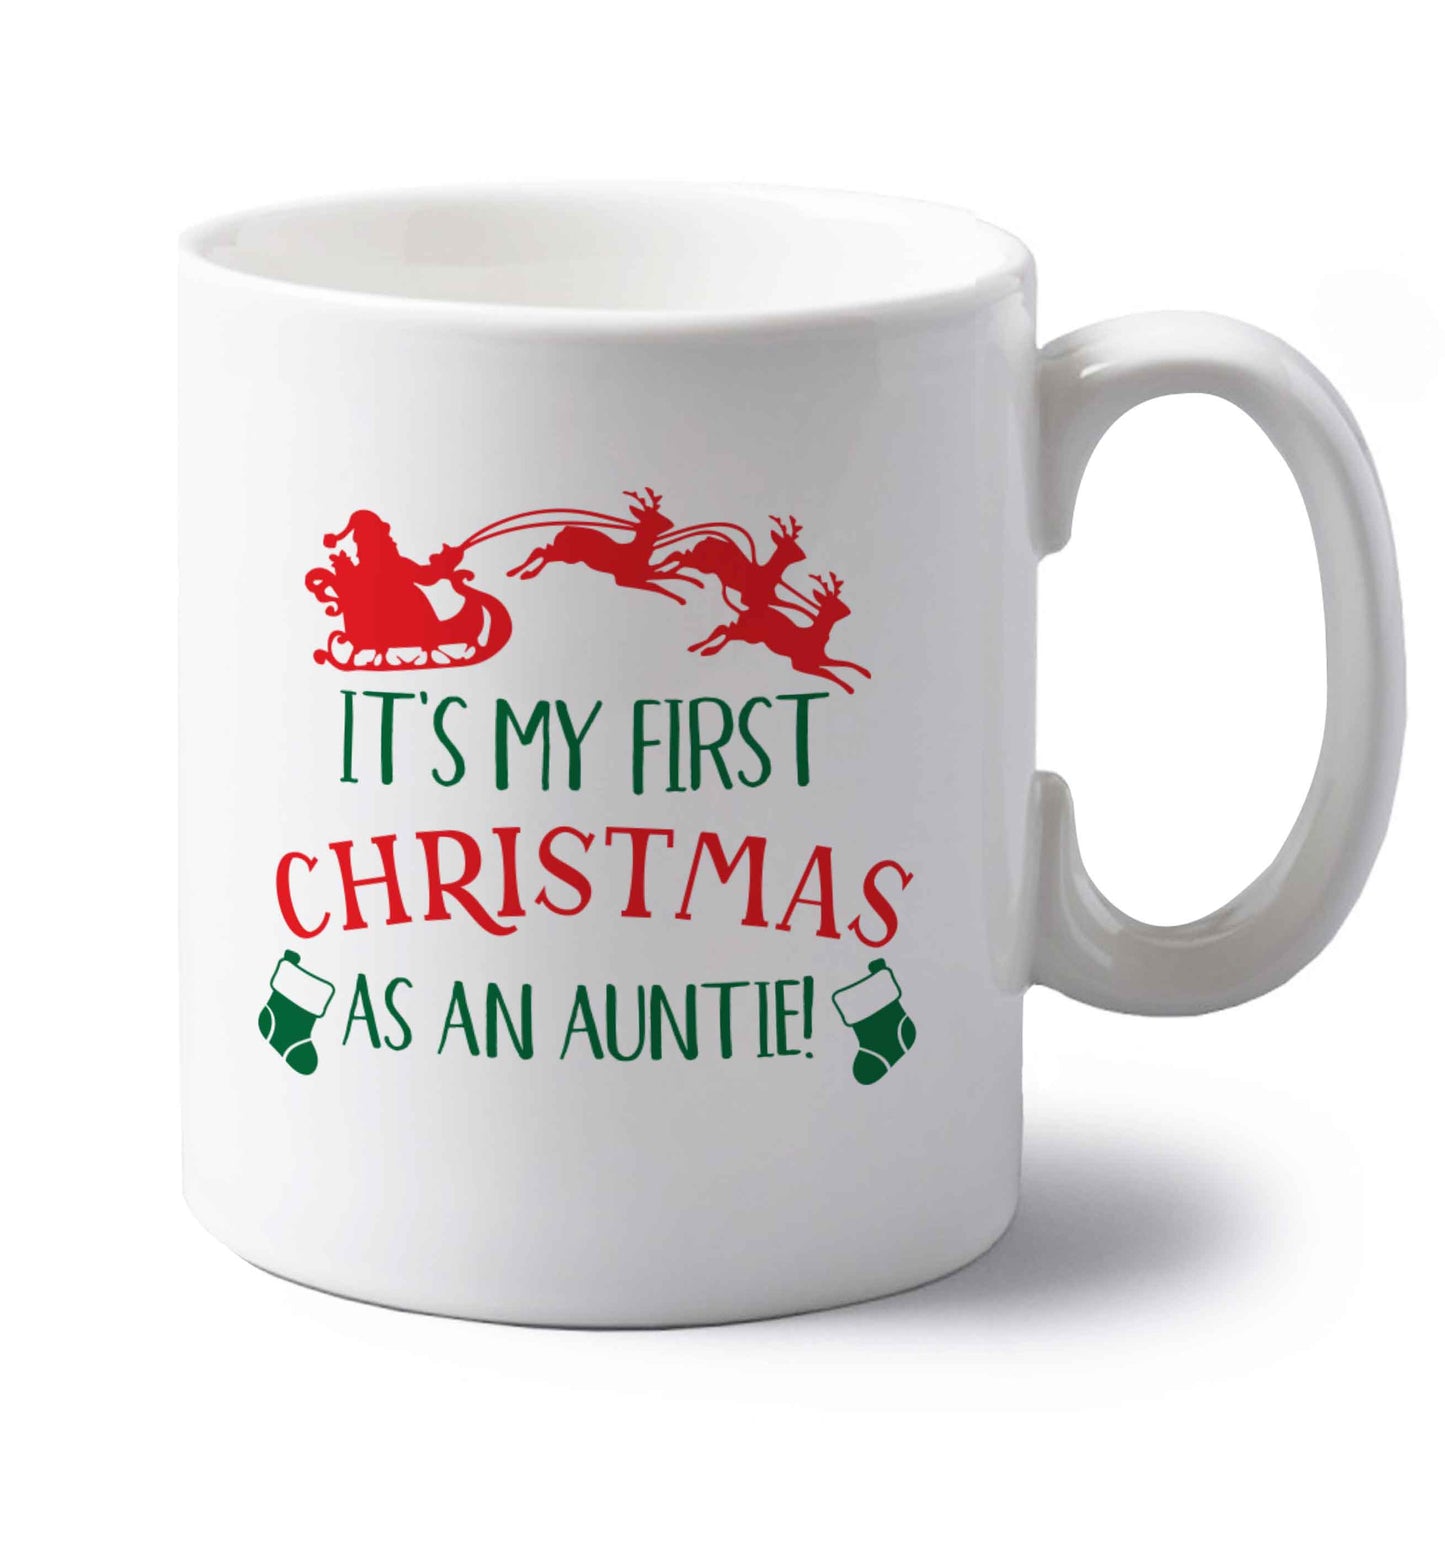 It's my first Christmas as an auntie! left handed white ceramic mug 